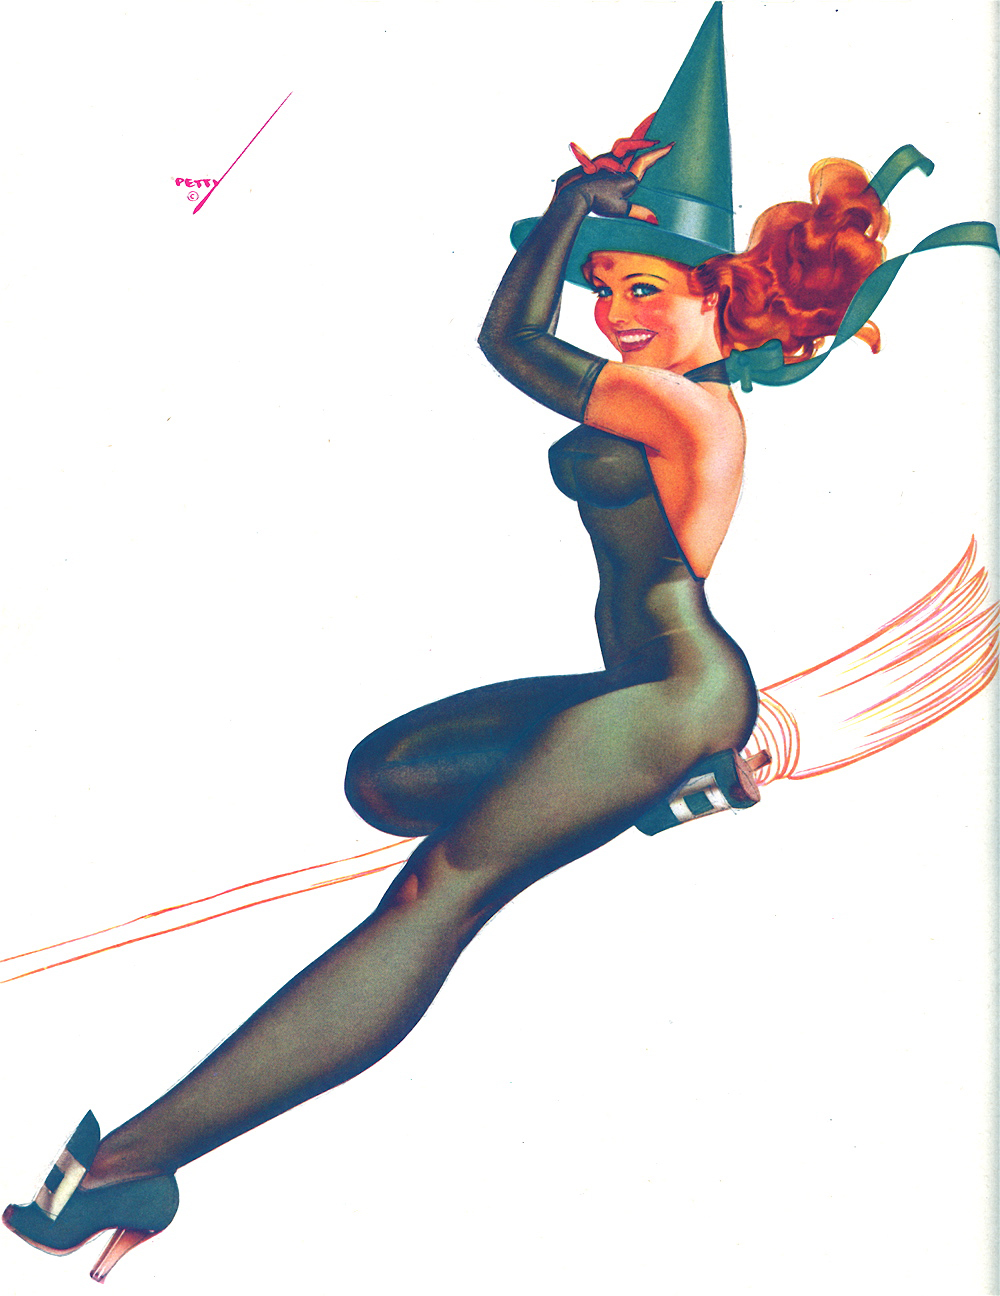 The nose art was based on the George Petty original cheesecake for True Mag...